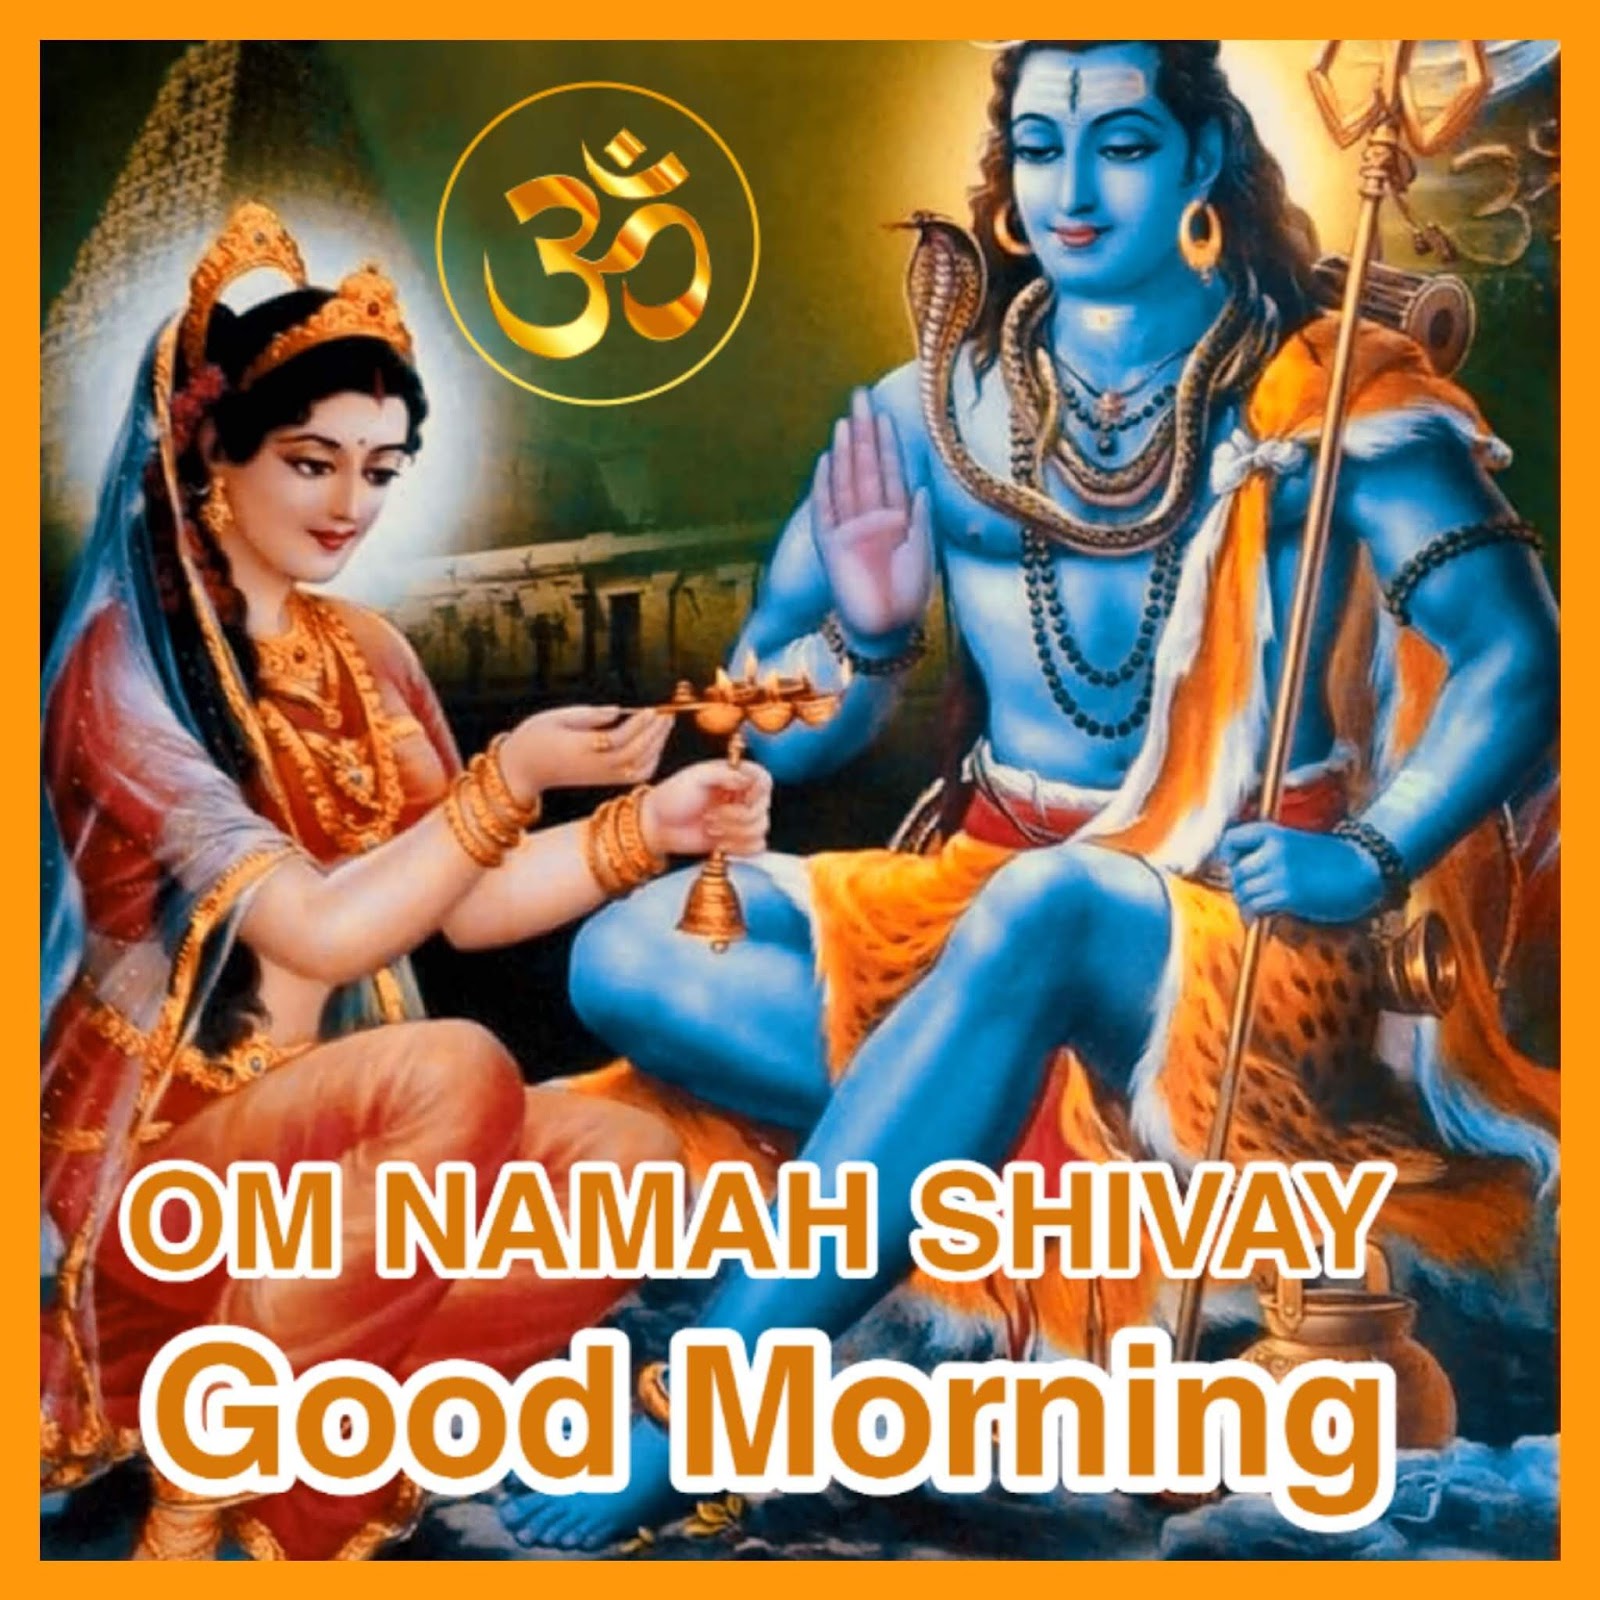 Good Morning Lord Shiva Images With Shubh Somvar Pictures Wallpaper Download Best Wishes Image